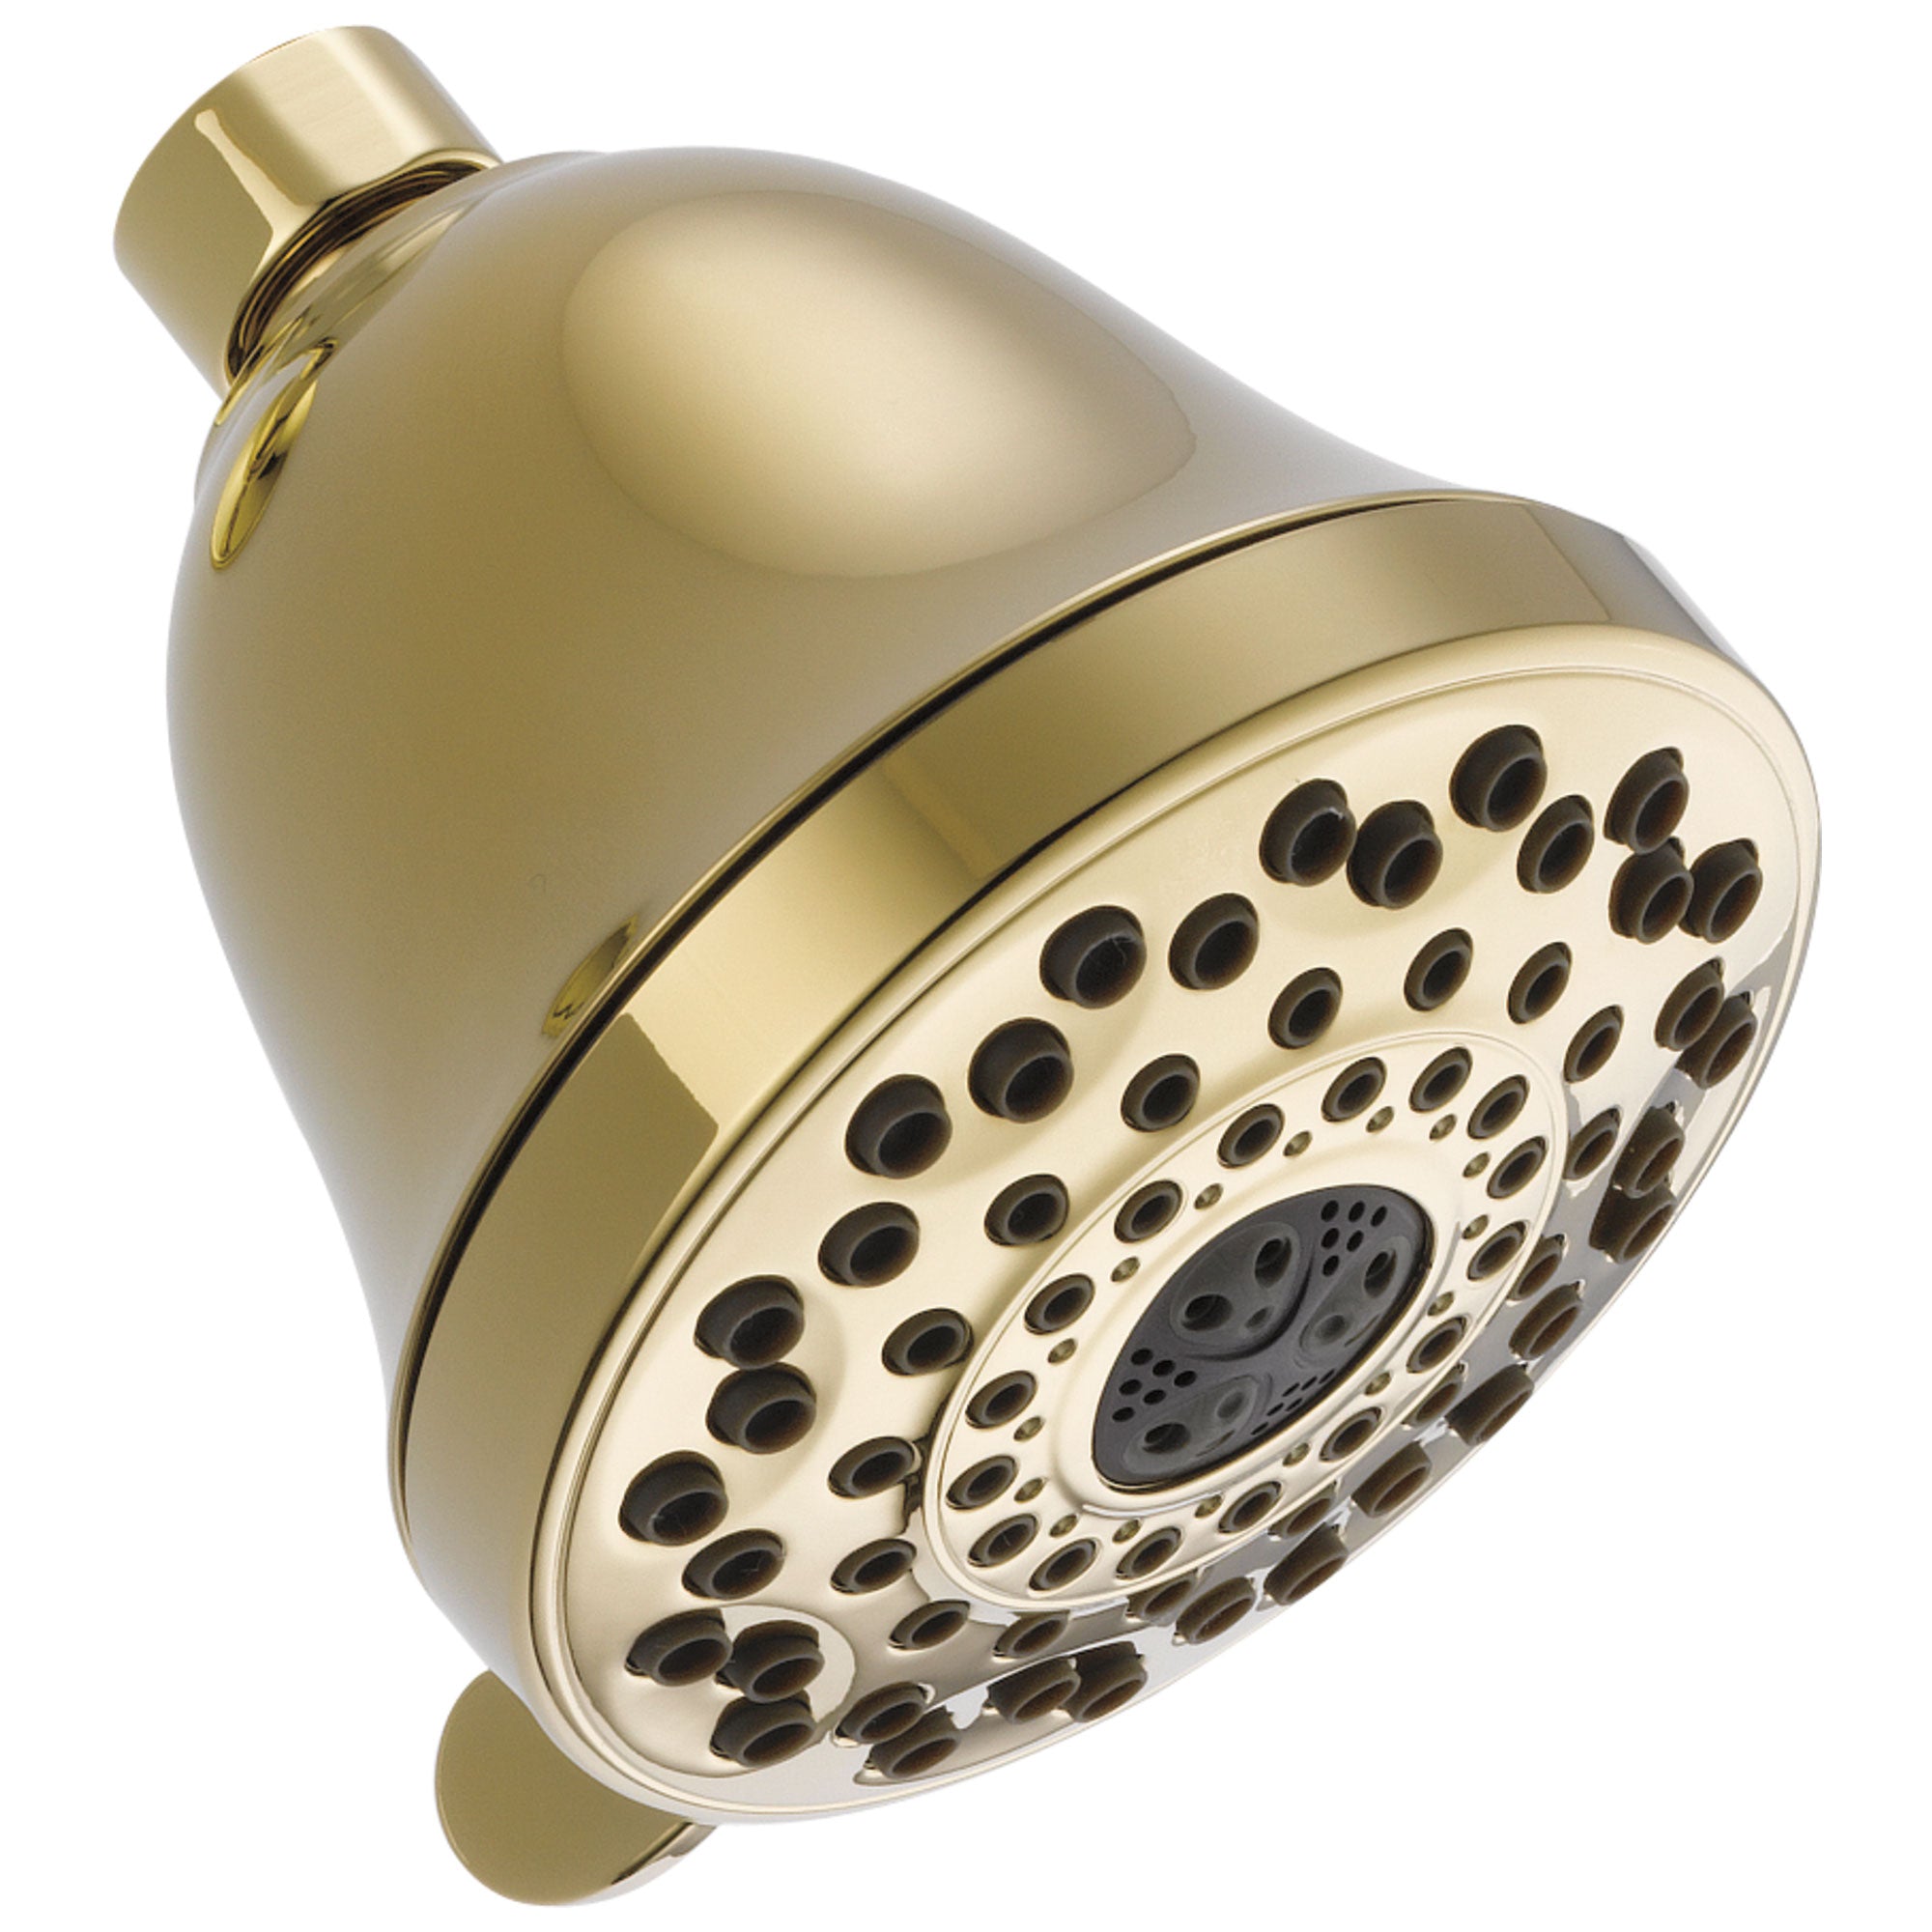 Delta Universal Showering Components Collection Polished Brass Finish 7-Setting Shower Head D52626PBPK